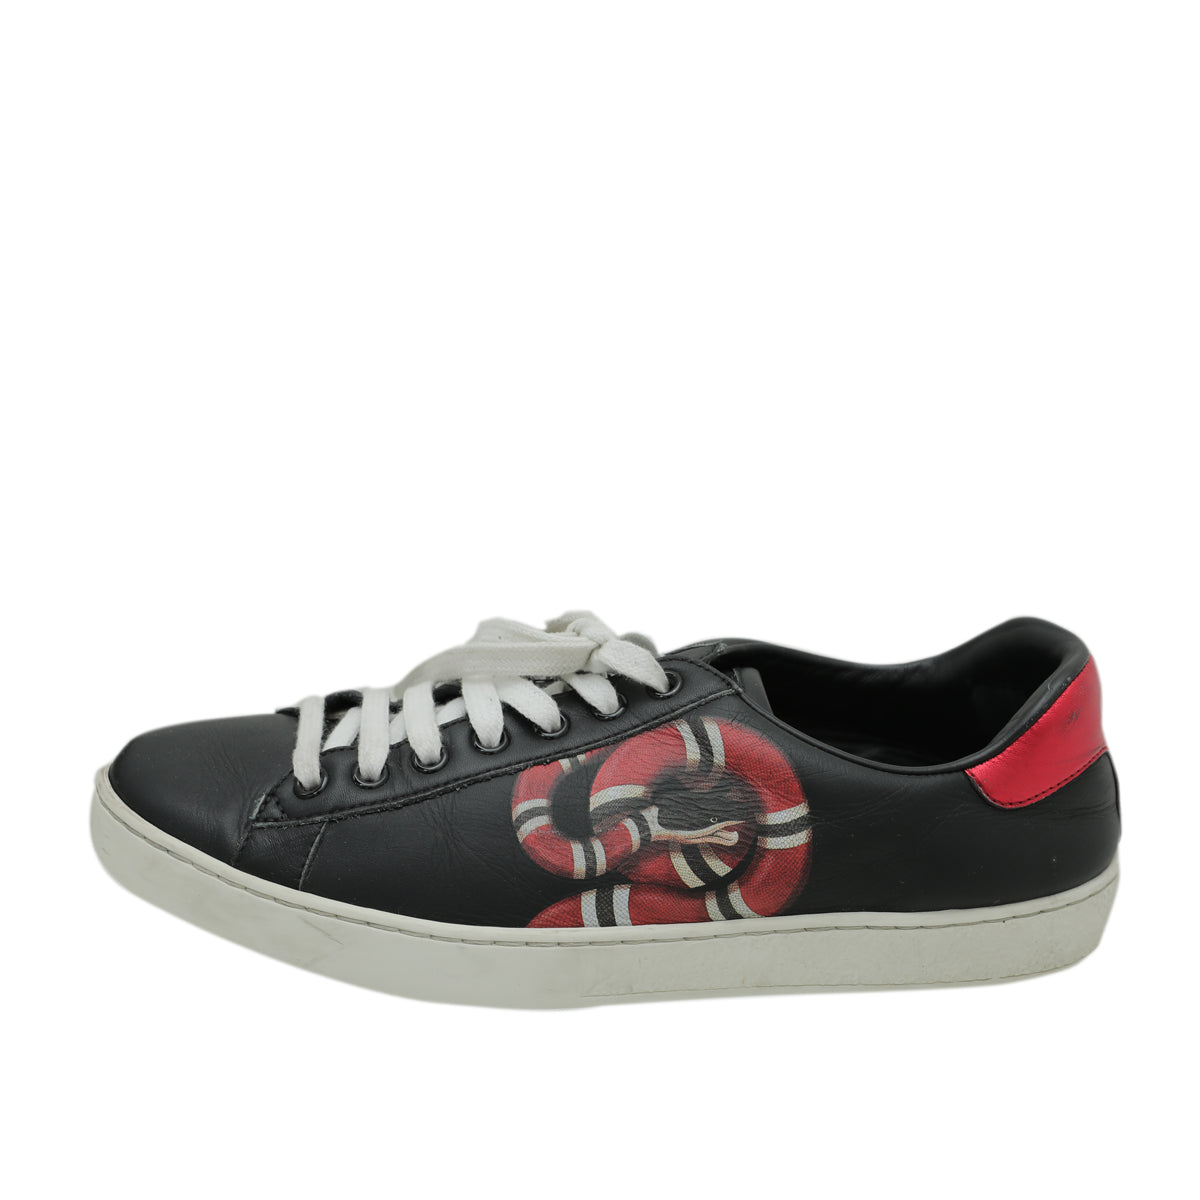 Gucci Multicolor Kingsnake Men's Ace Sneakers 5 – The Closet